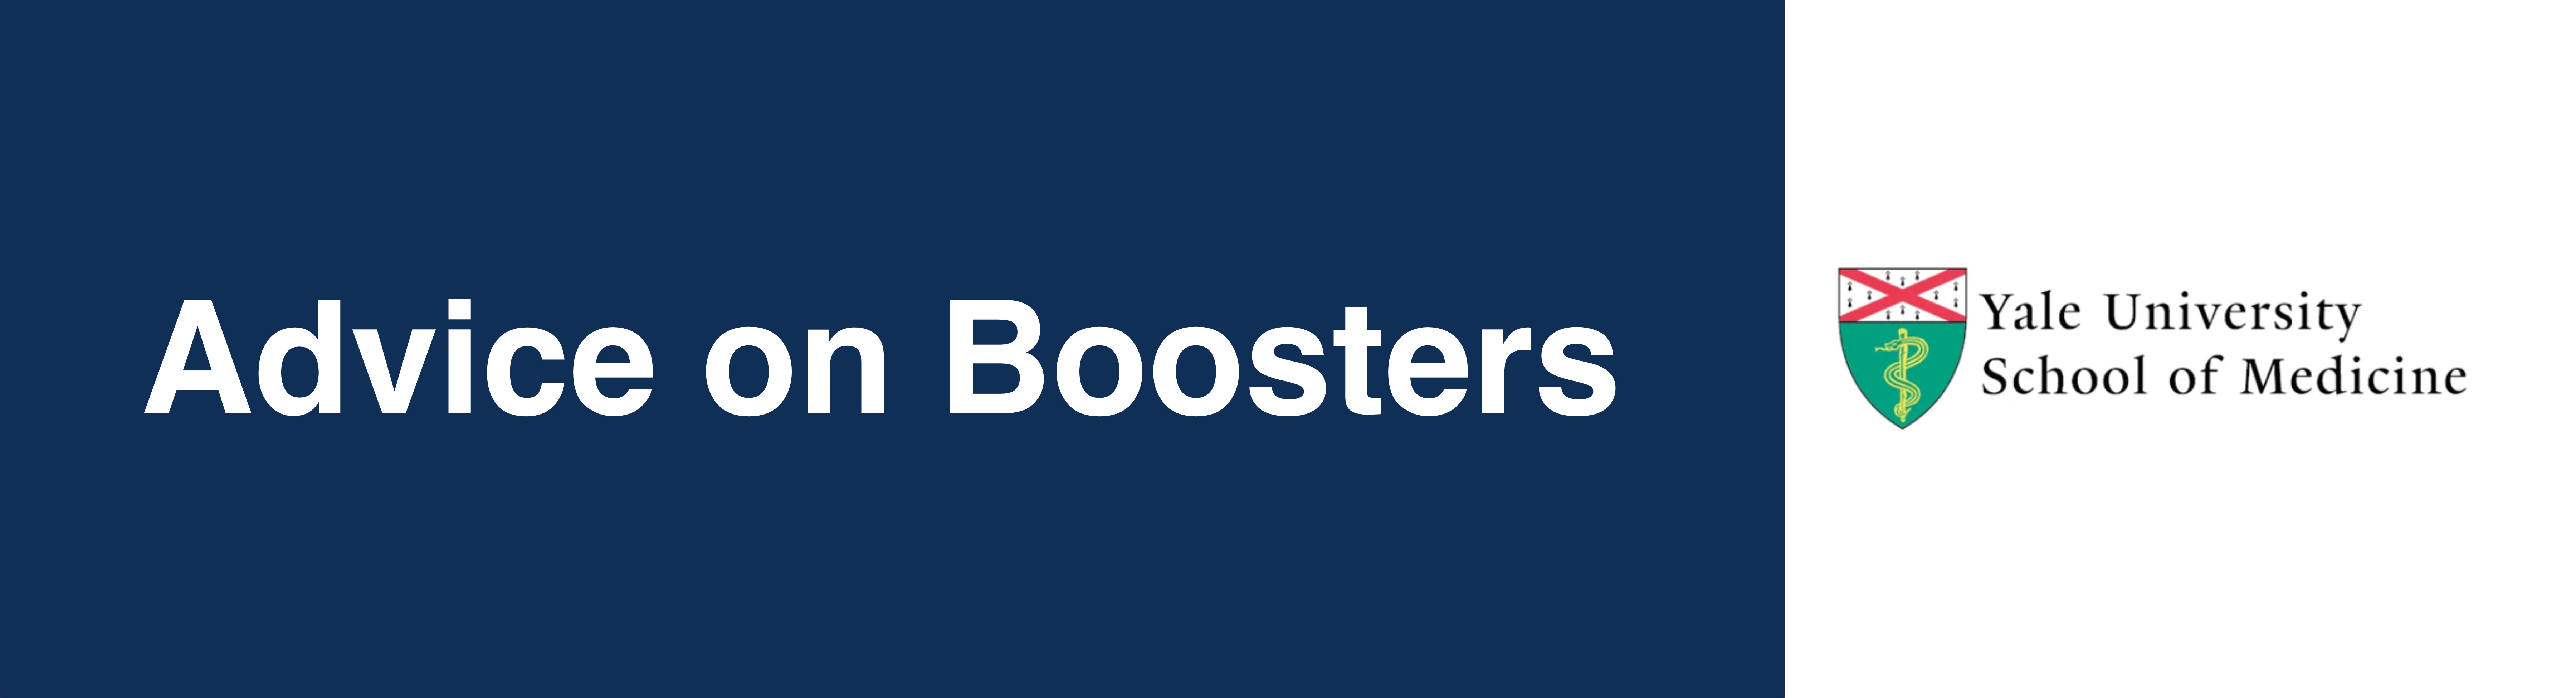 Yale Medicine on Boosters